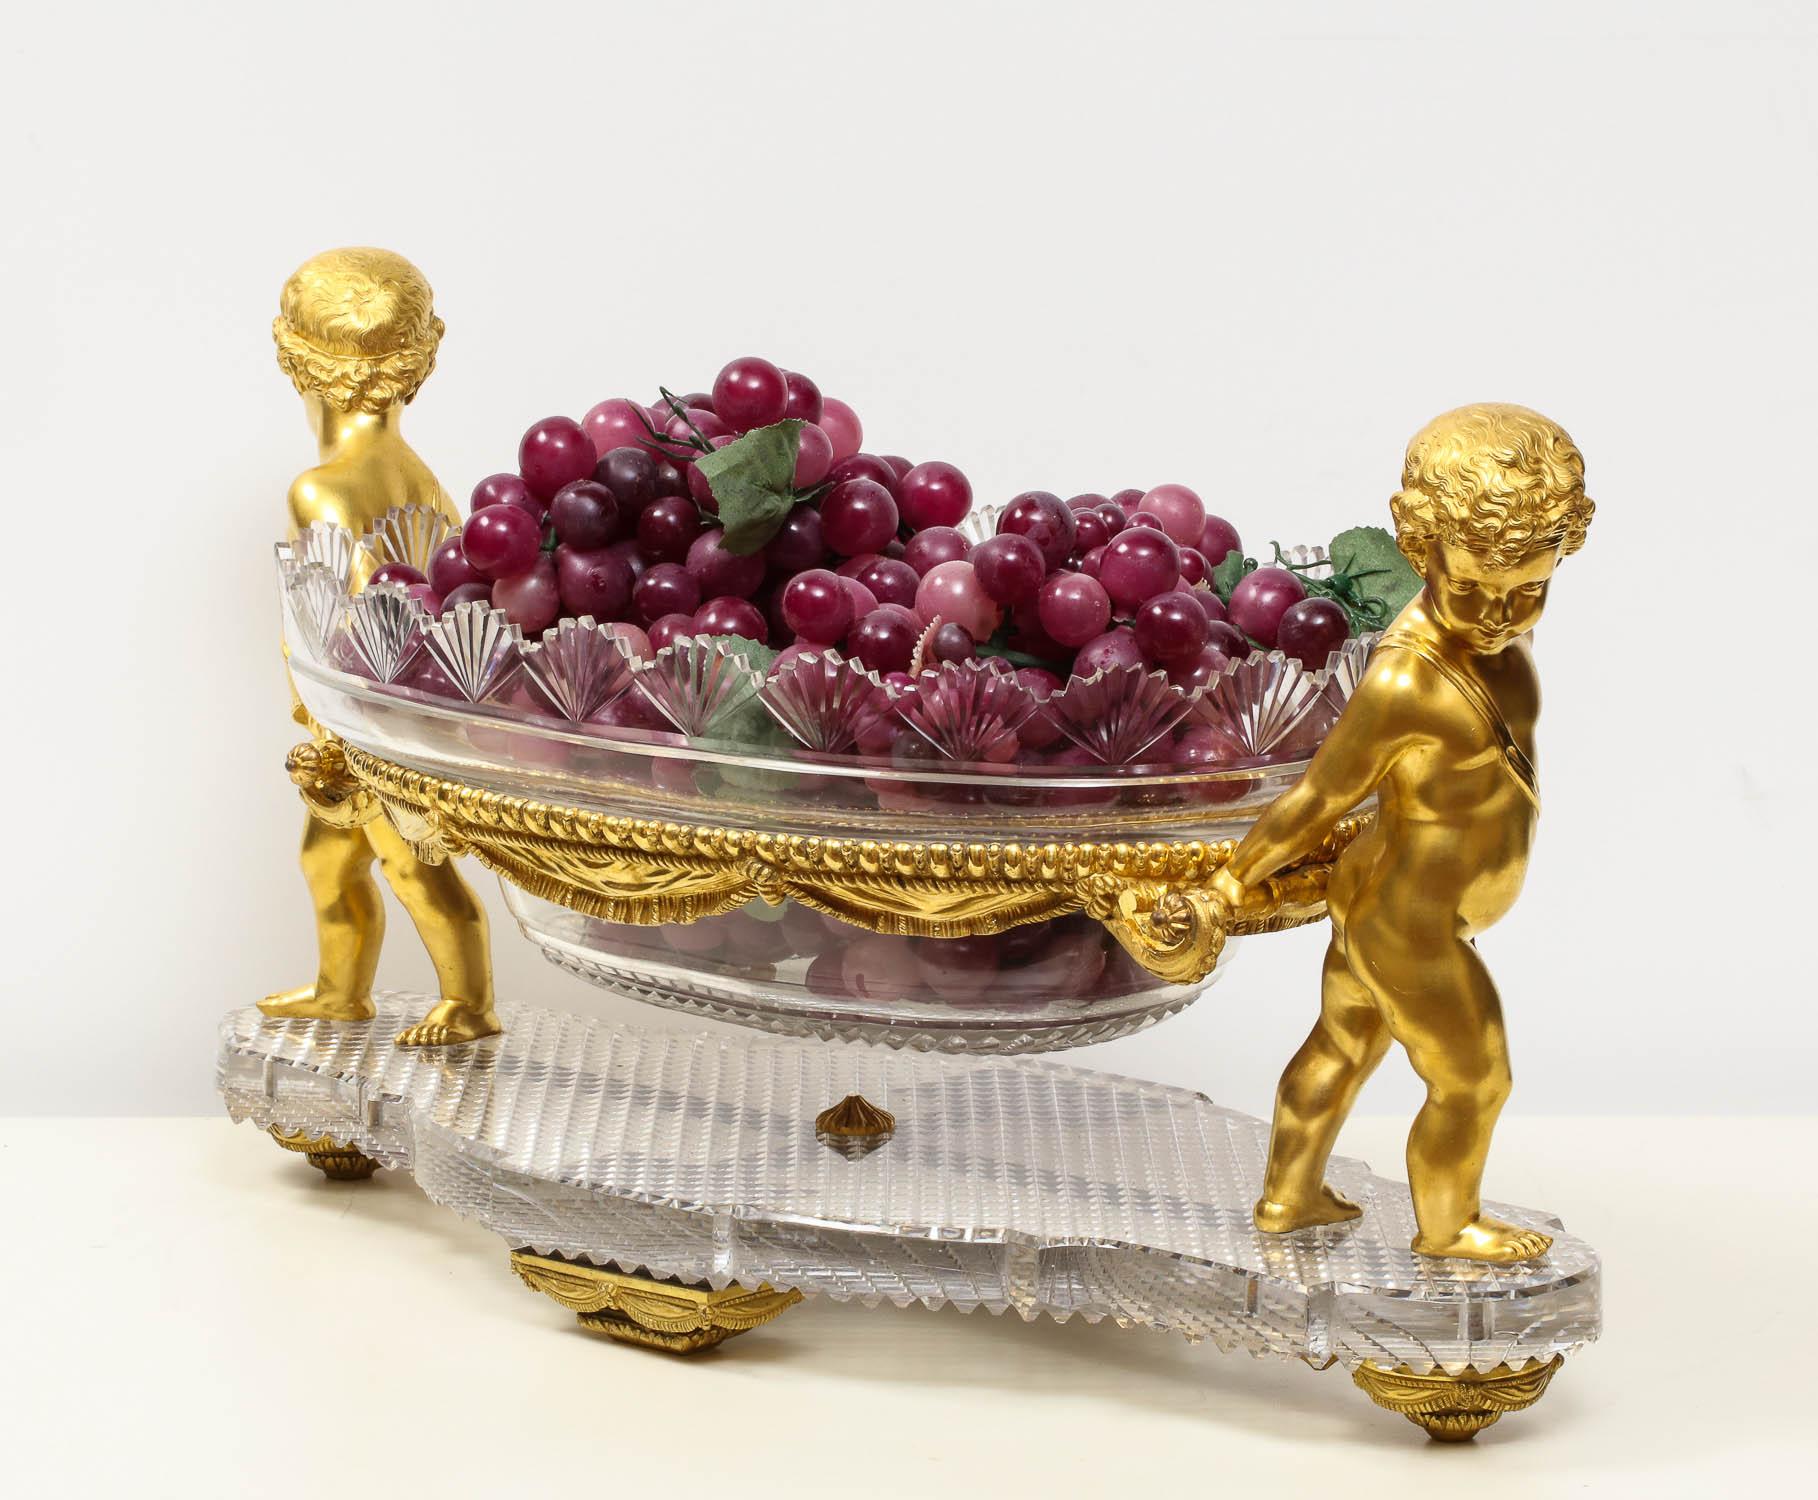 19th Century French Ormolu and Cut-Glass Centerpiece by Baccarat Paris, circa 1870